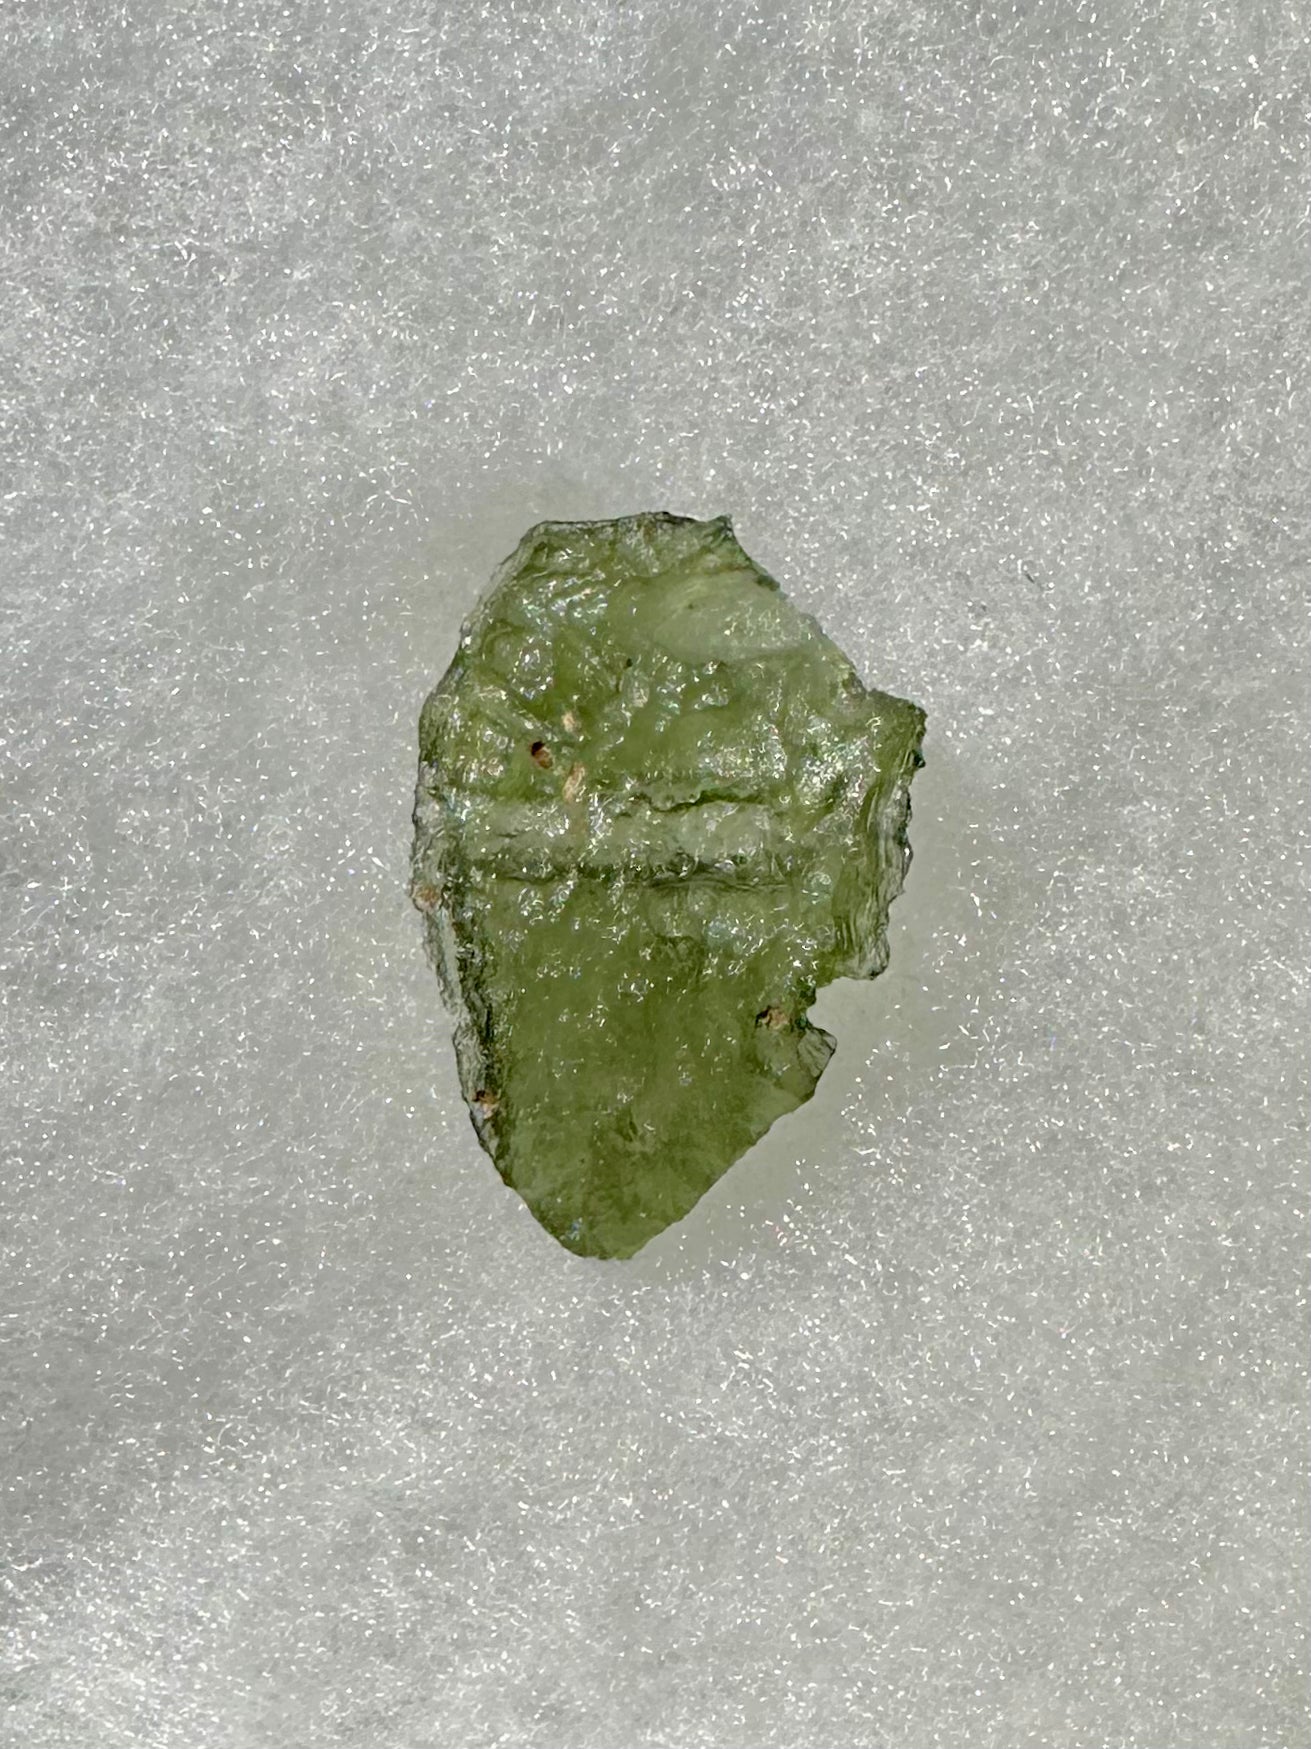 Moldavite Specimens Collection Pieces up to 10g - The Harmony Store